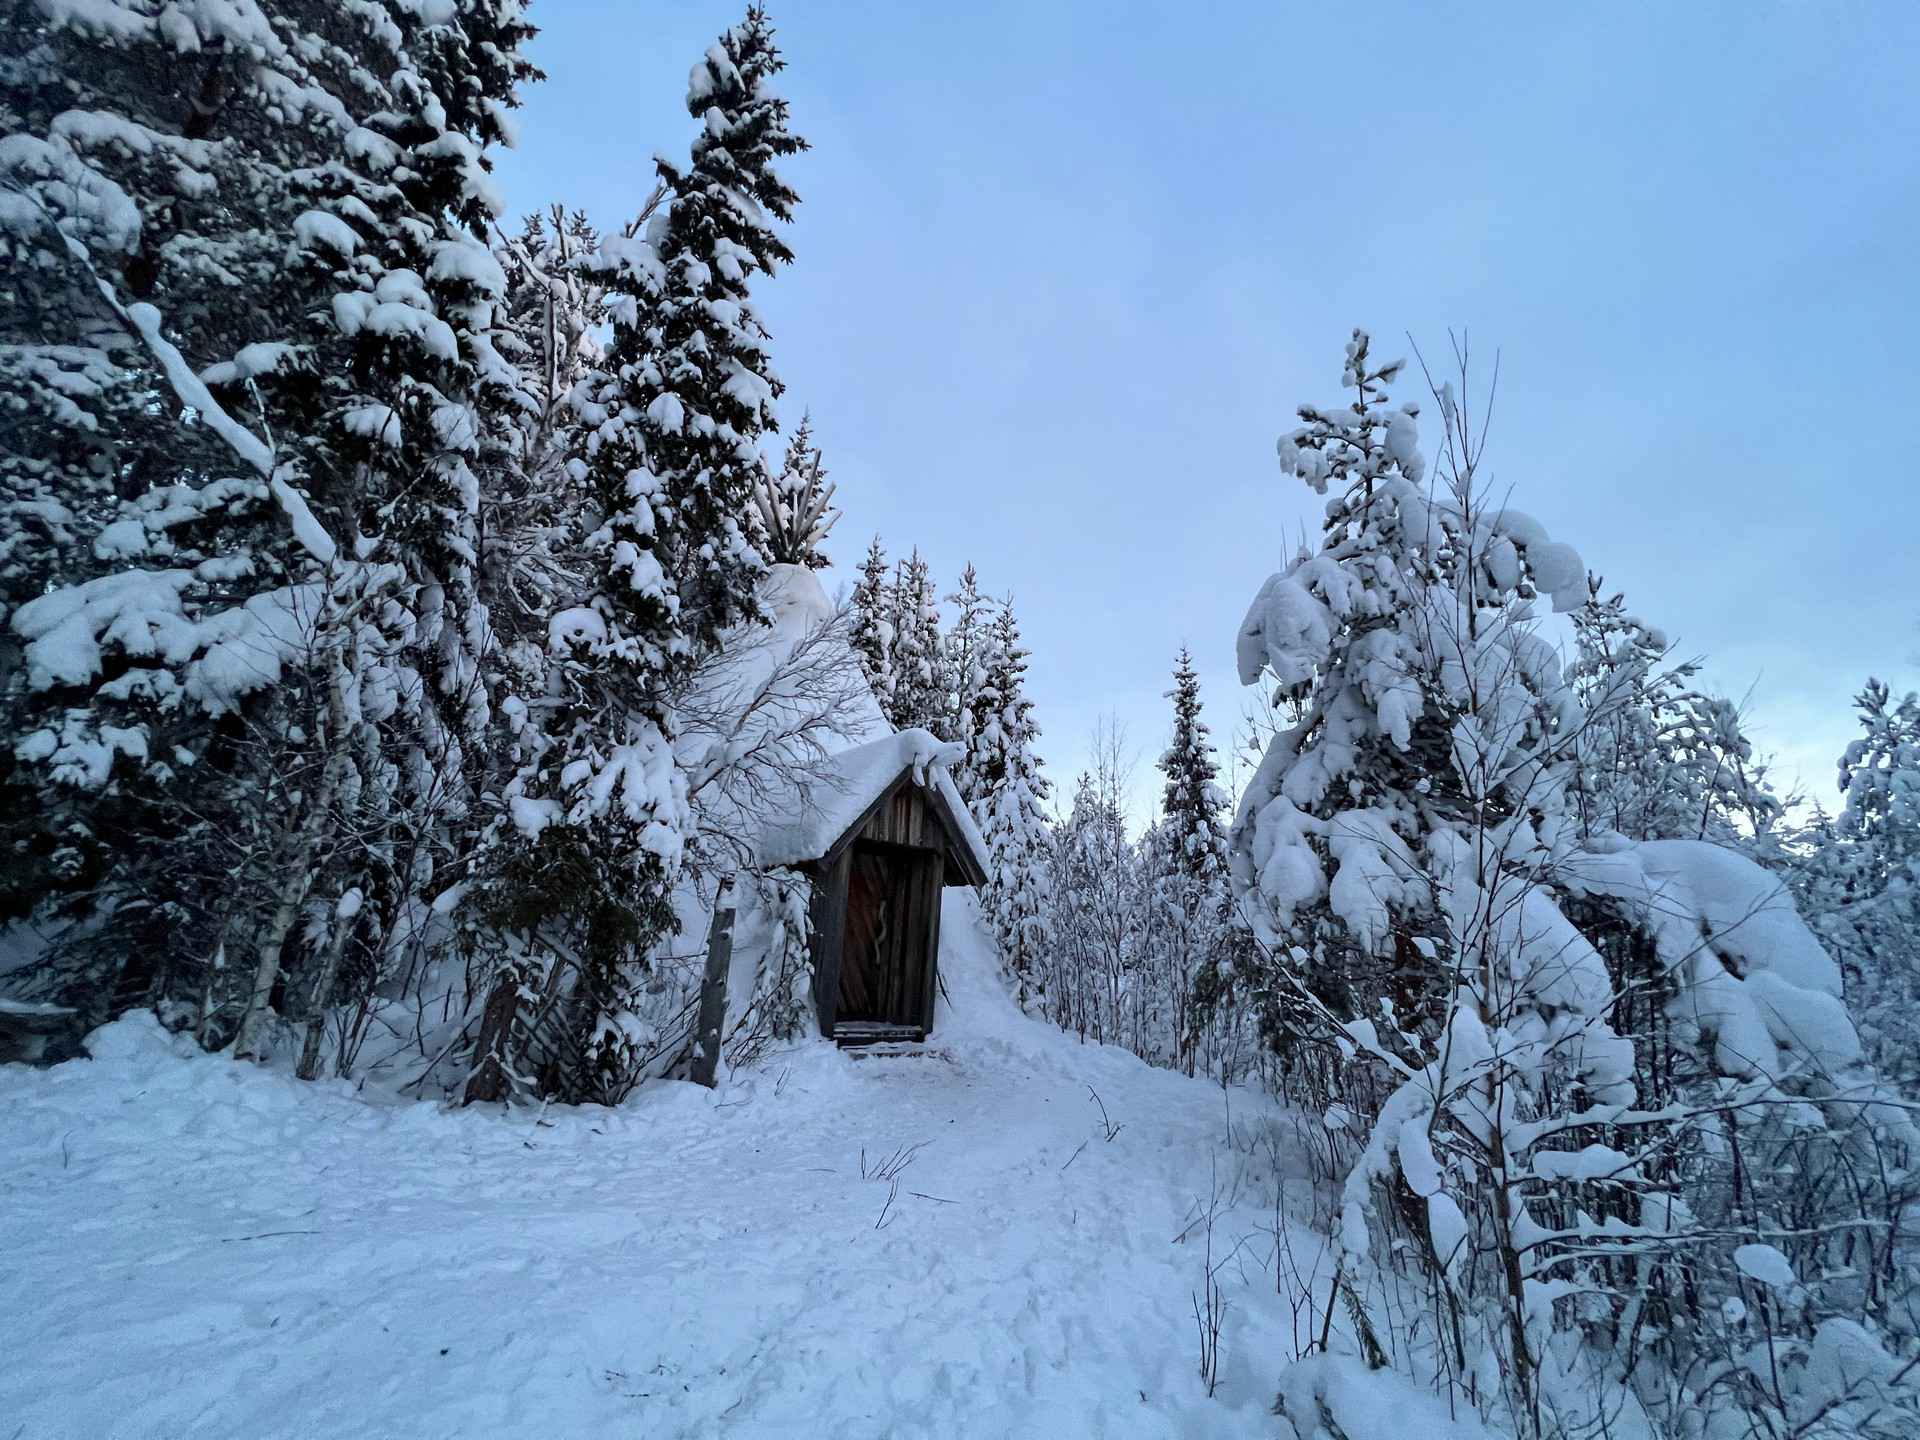 Cabin by the snow covered trees in Rovaniemi, Finland. Christmas Day in Lapland